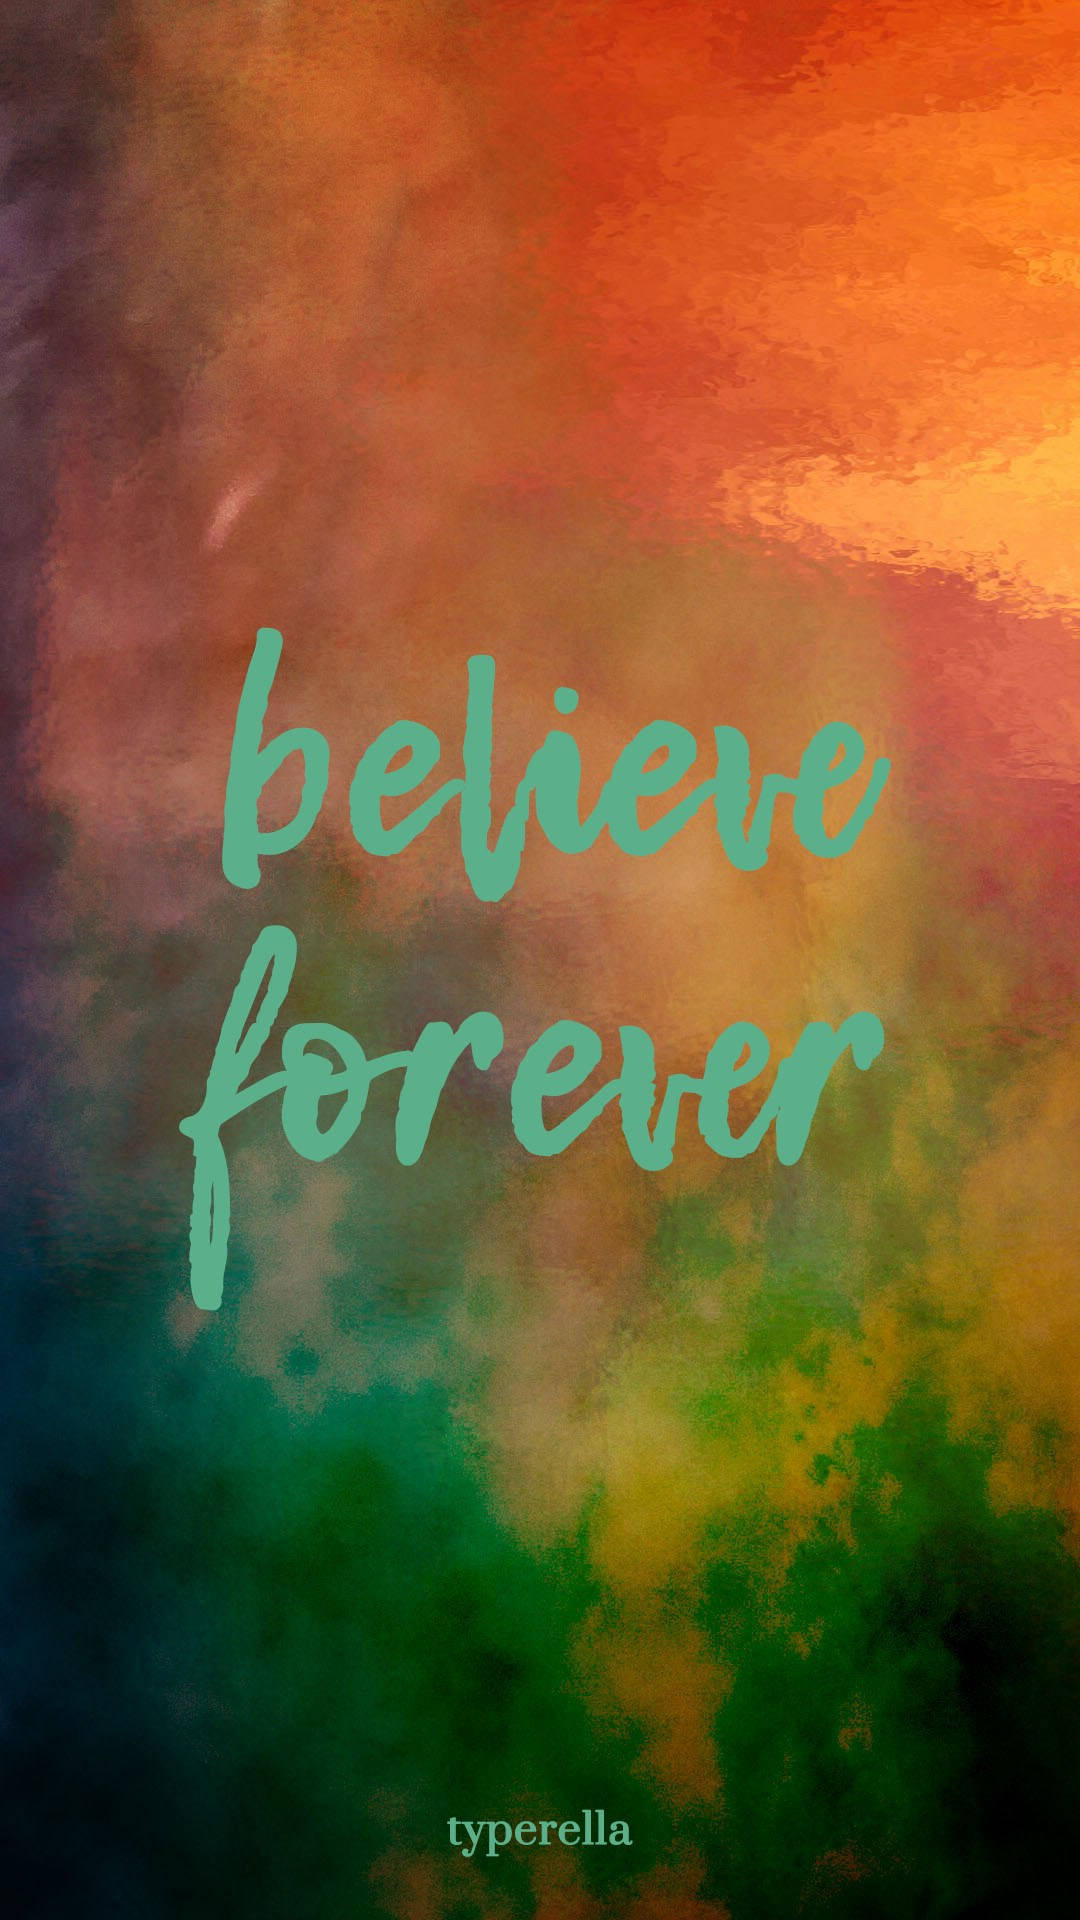 Believe Forever Inspirational Quote Wallpaper